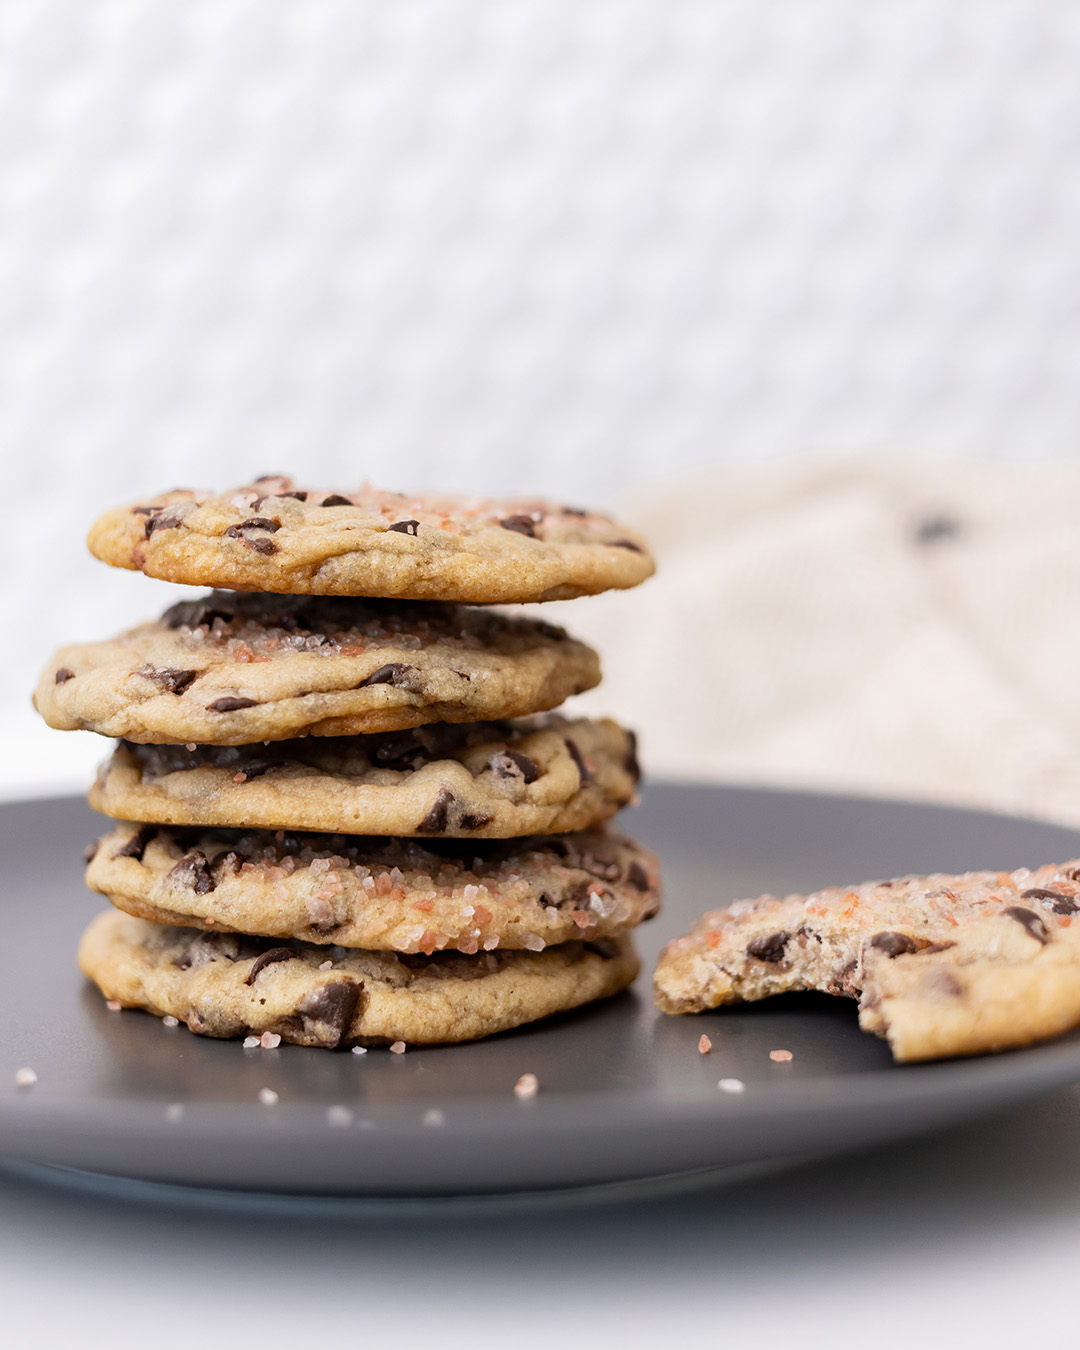 The perfect chewy chocolate chip cookie, elevated just a little bit. Here's how to make my new favorite salted chocolate chip cookies!